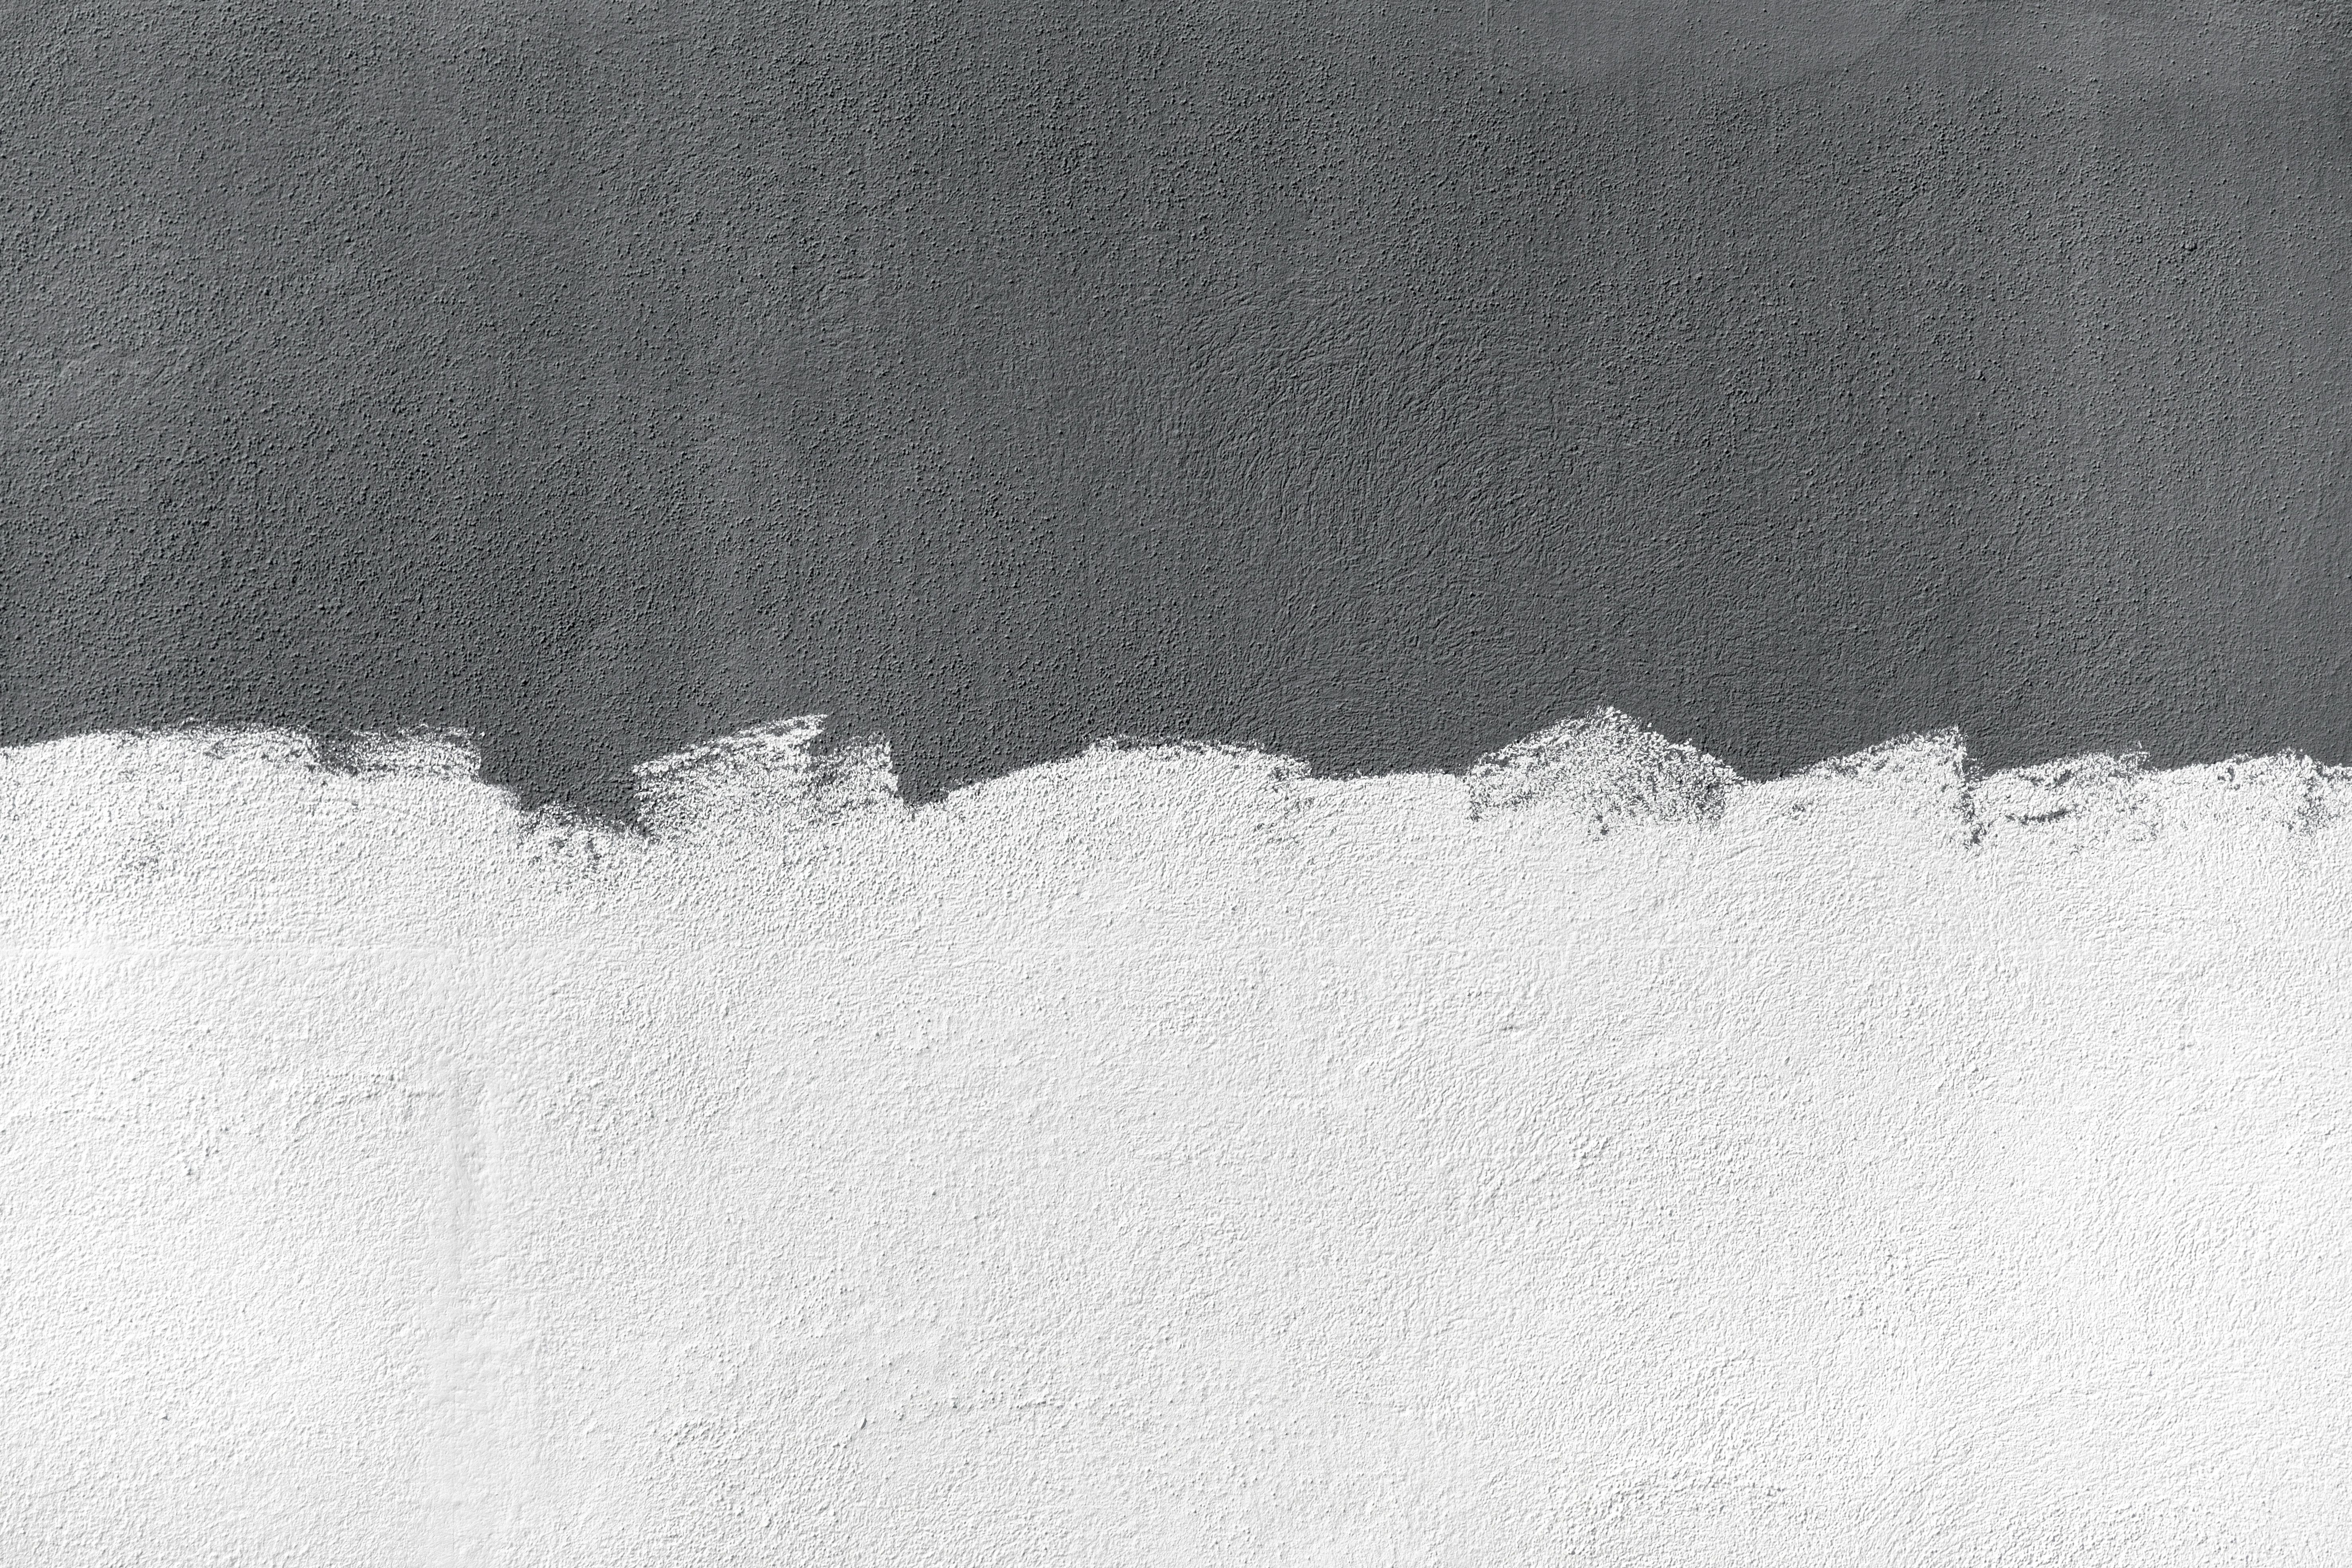 5904x3936 #painting wall, #color, #white, #flat color, #gray, # minimalist, #minimal, #abstract, #minimalism, #texture, #PNG image, #paint brush, #paint, #paint stroke, #background, #flat, #wall, #grey